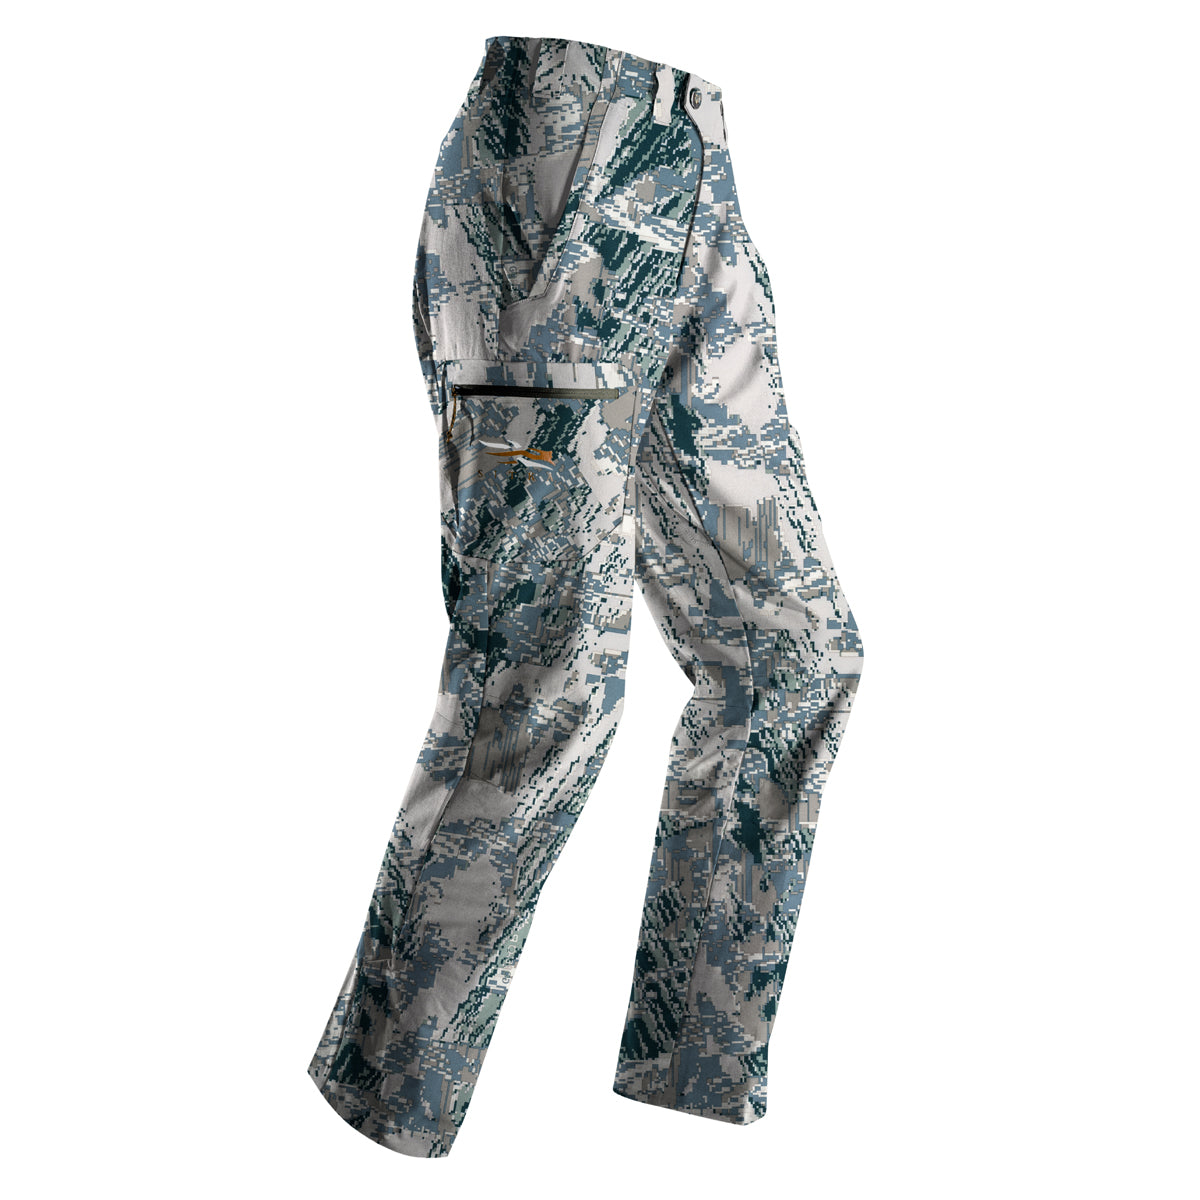 Sitka Ascent Pant in Sitka Ascent Pant by Sitka | Apparel - goHUNT Shop by GOHUNT | Sitka - GOHUNT Shop